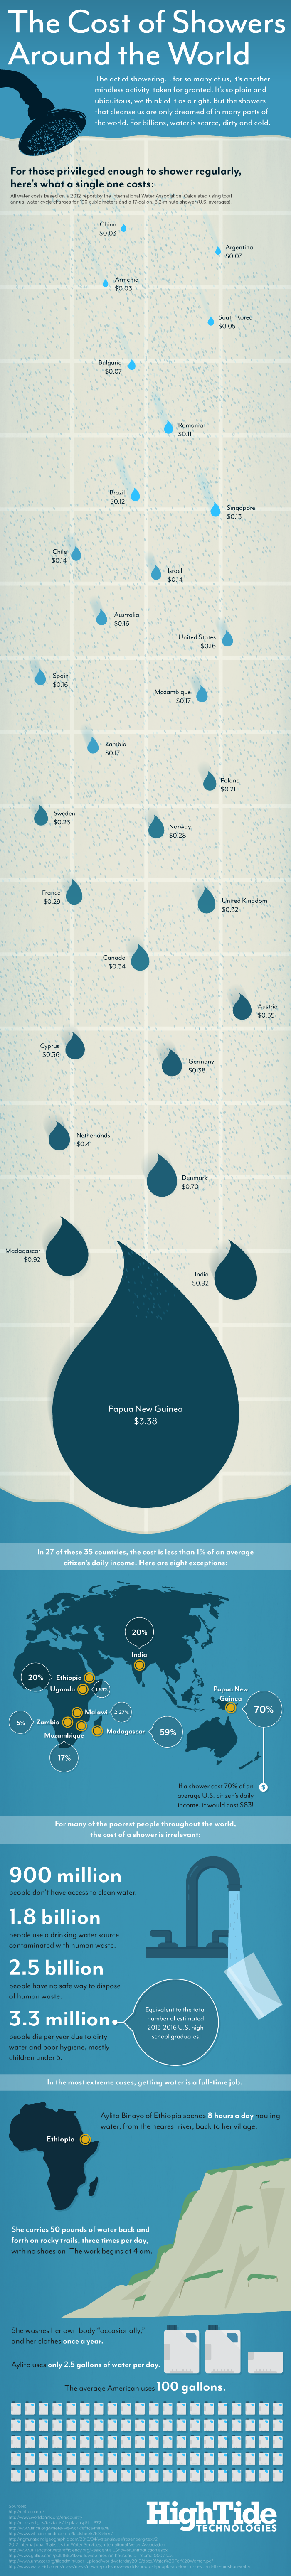 The Cost of Showers Around the World